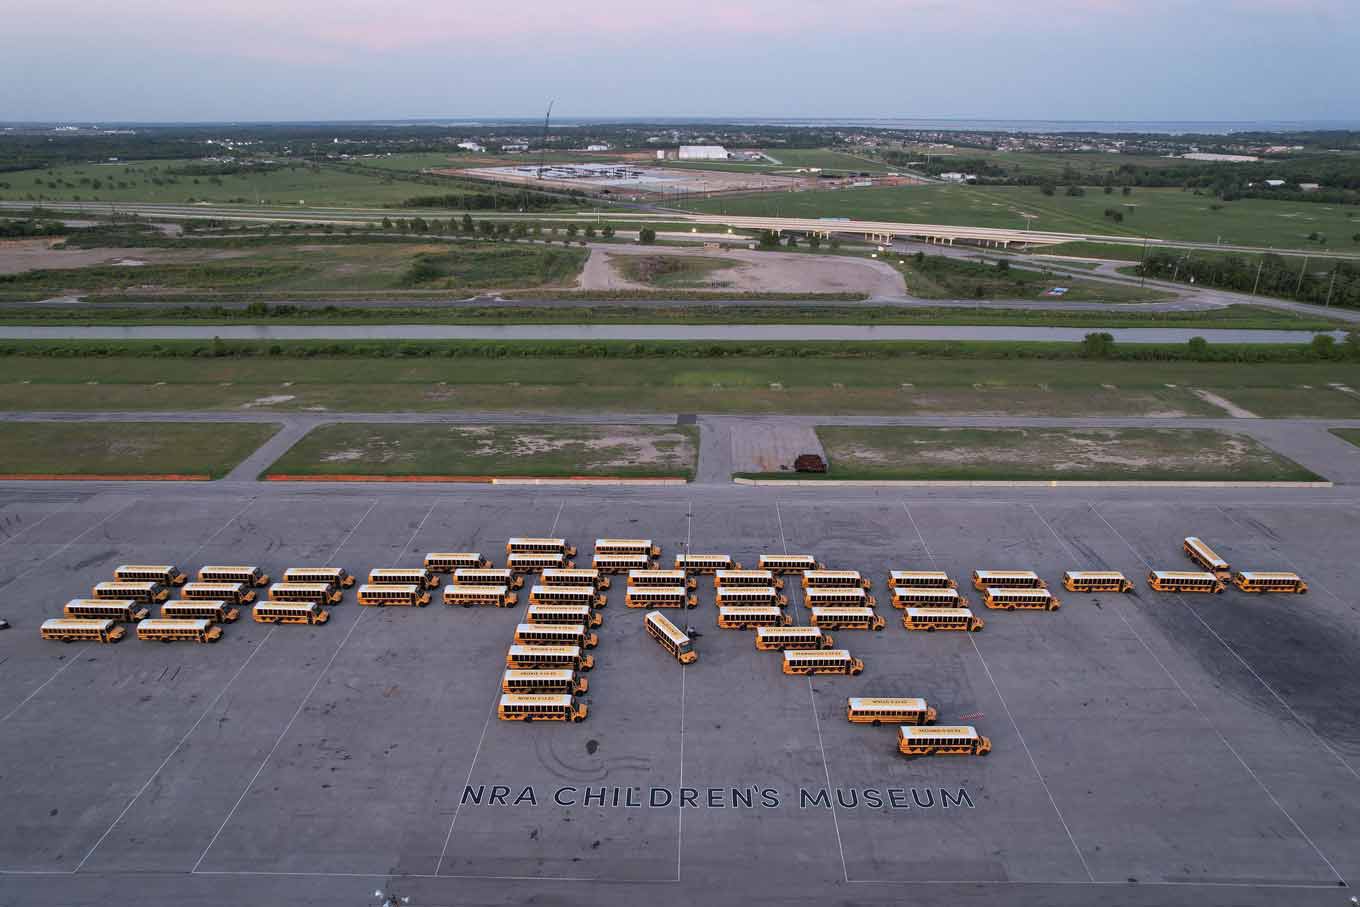 Dozens of school buses parked in the shape of a gun, with the words NRA Children's Museum